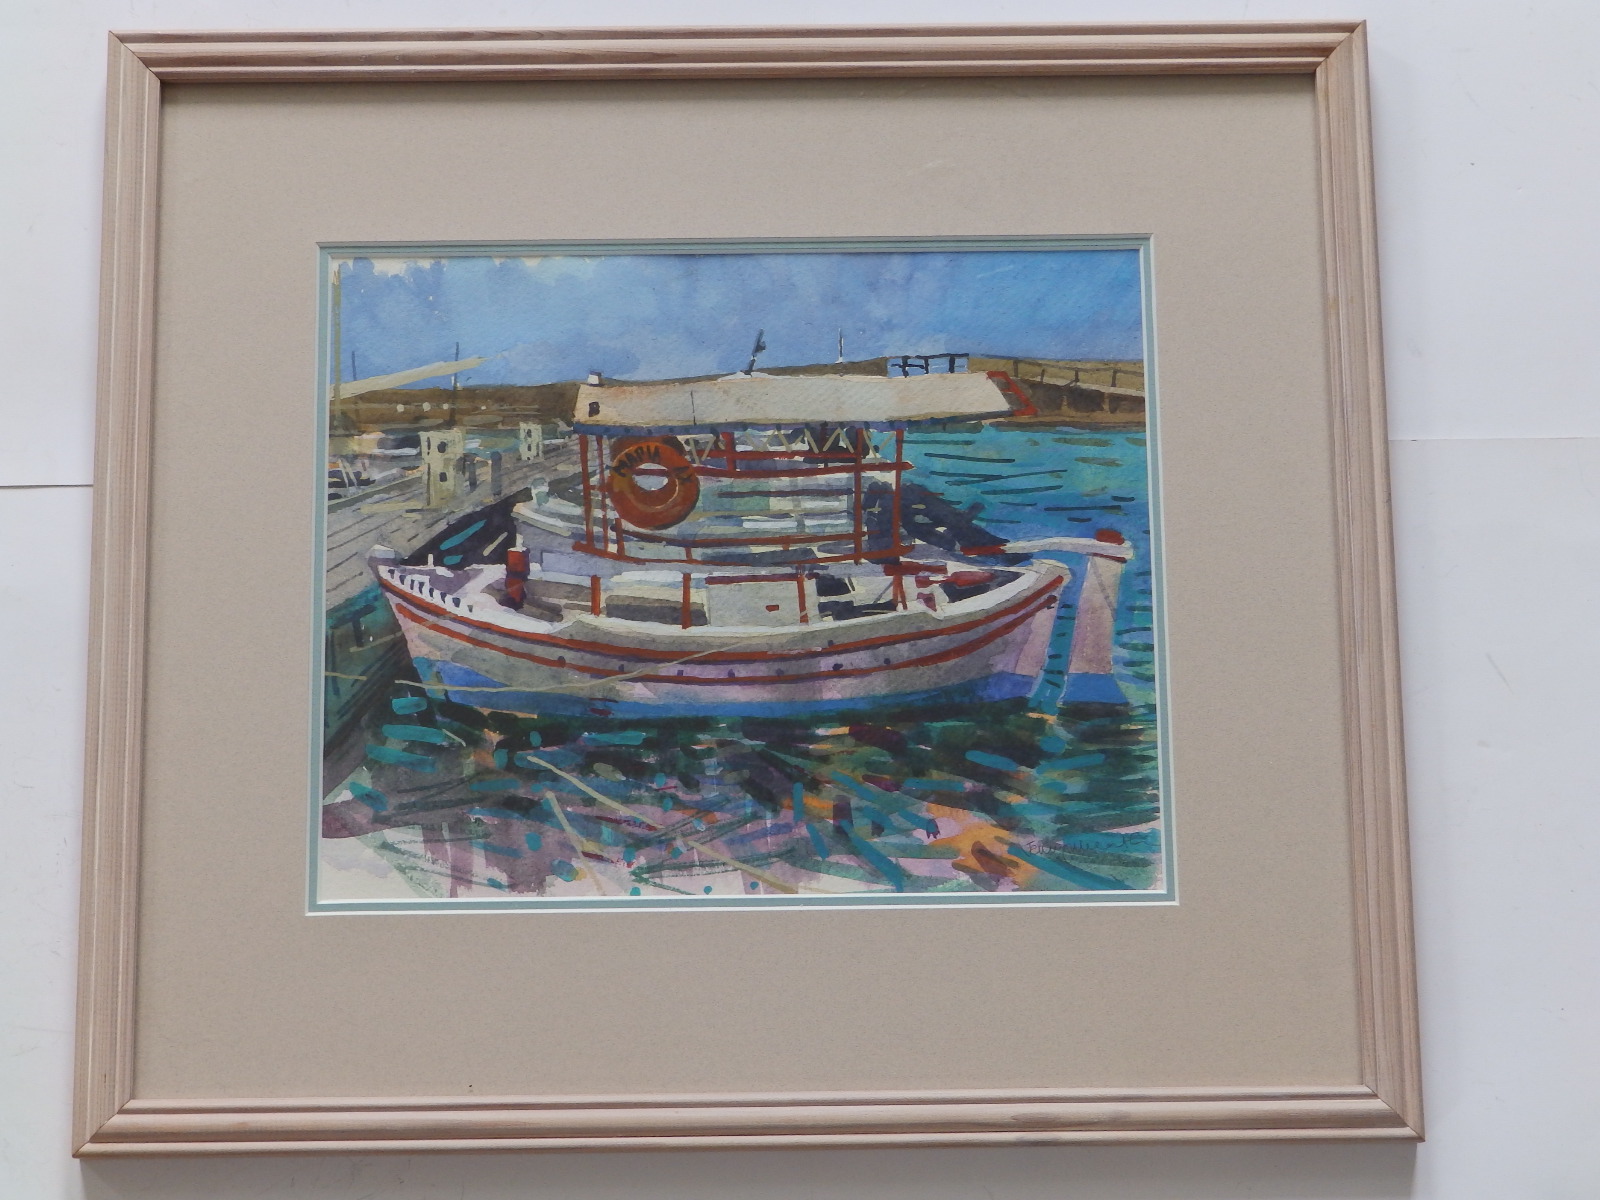 Jenny Wheatley RWS, NEAC (born 1959) - watercolour - A small ferry boat - 'Mapia AX', signed in - Image 3 of 4